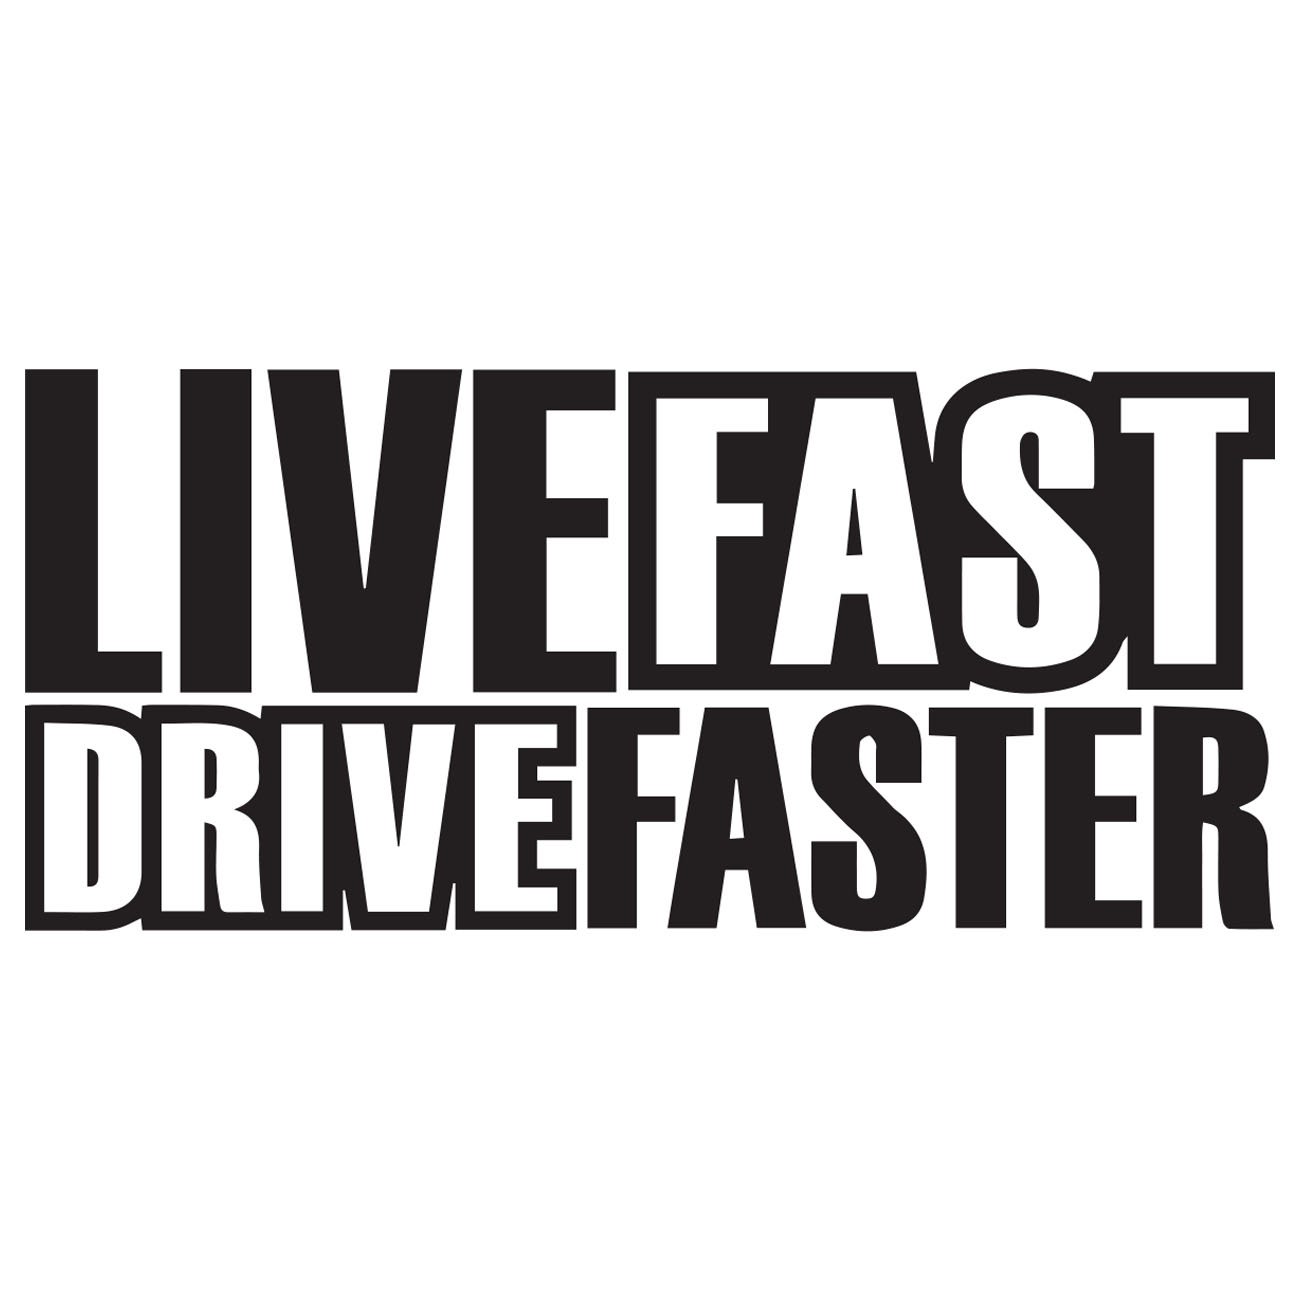 Live fast drive faster